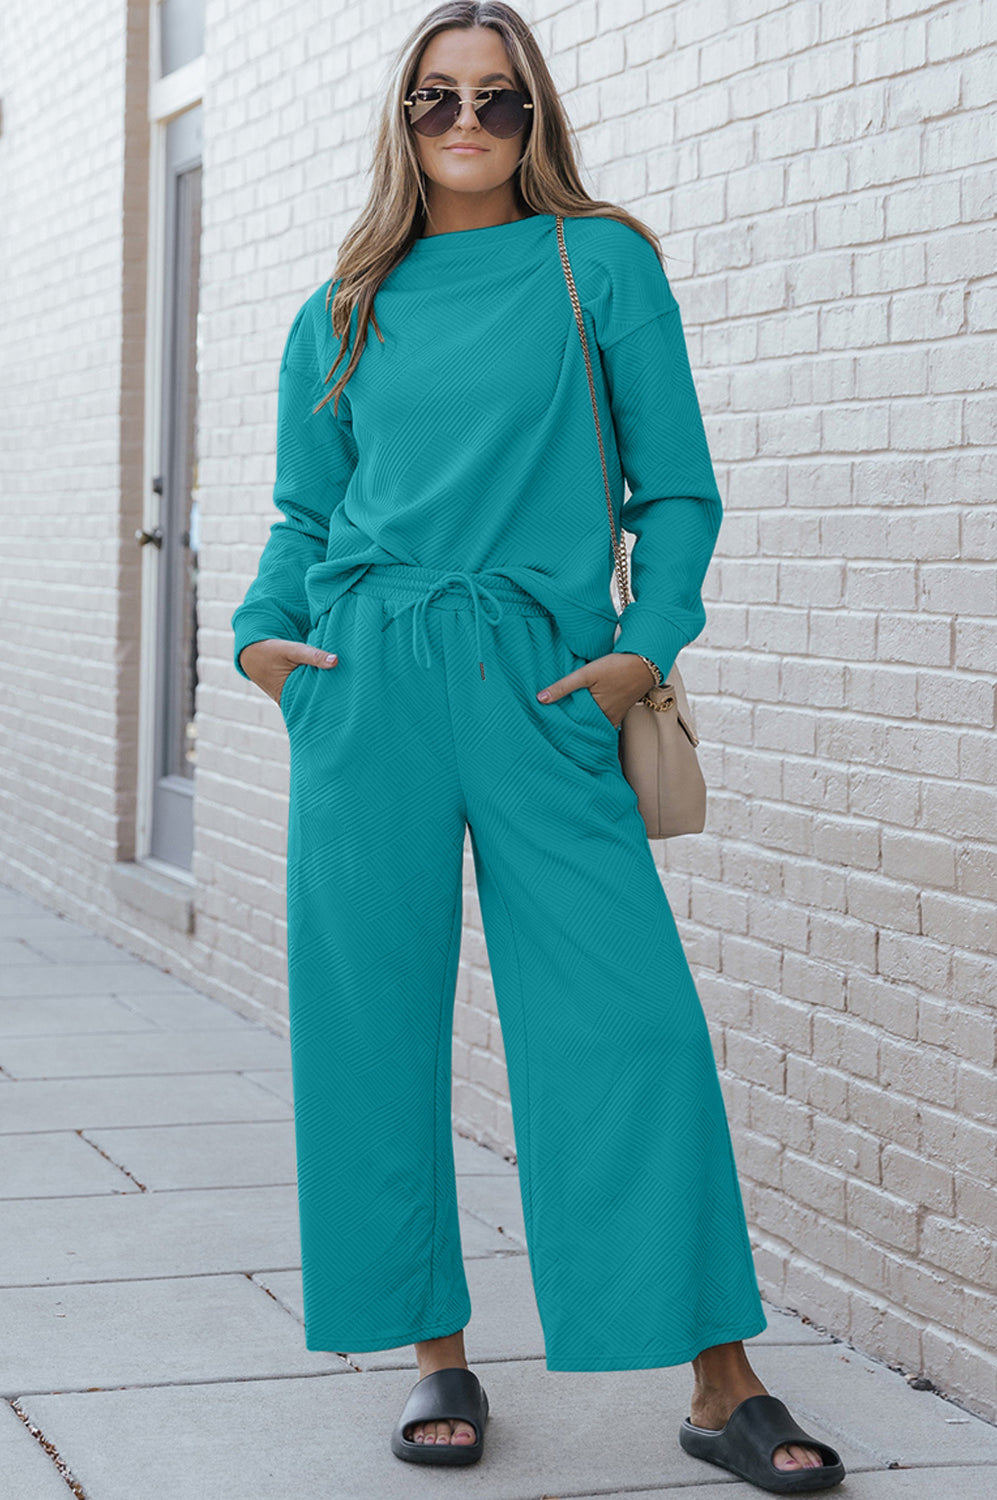 Double Take | Textured Long Sleeve Top and Drawstring Pants Set Double Take